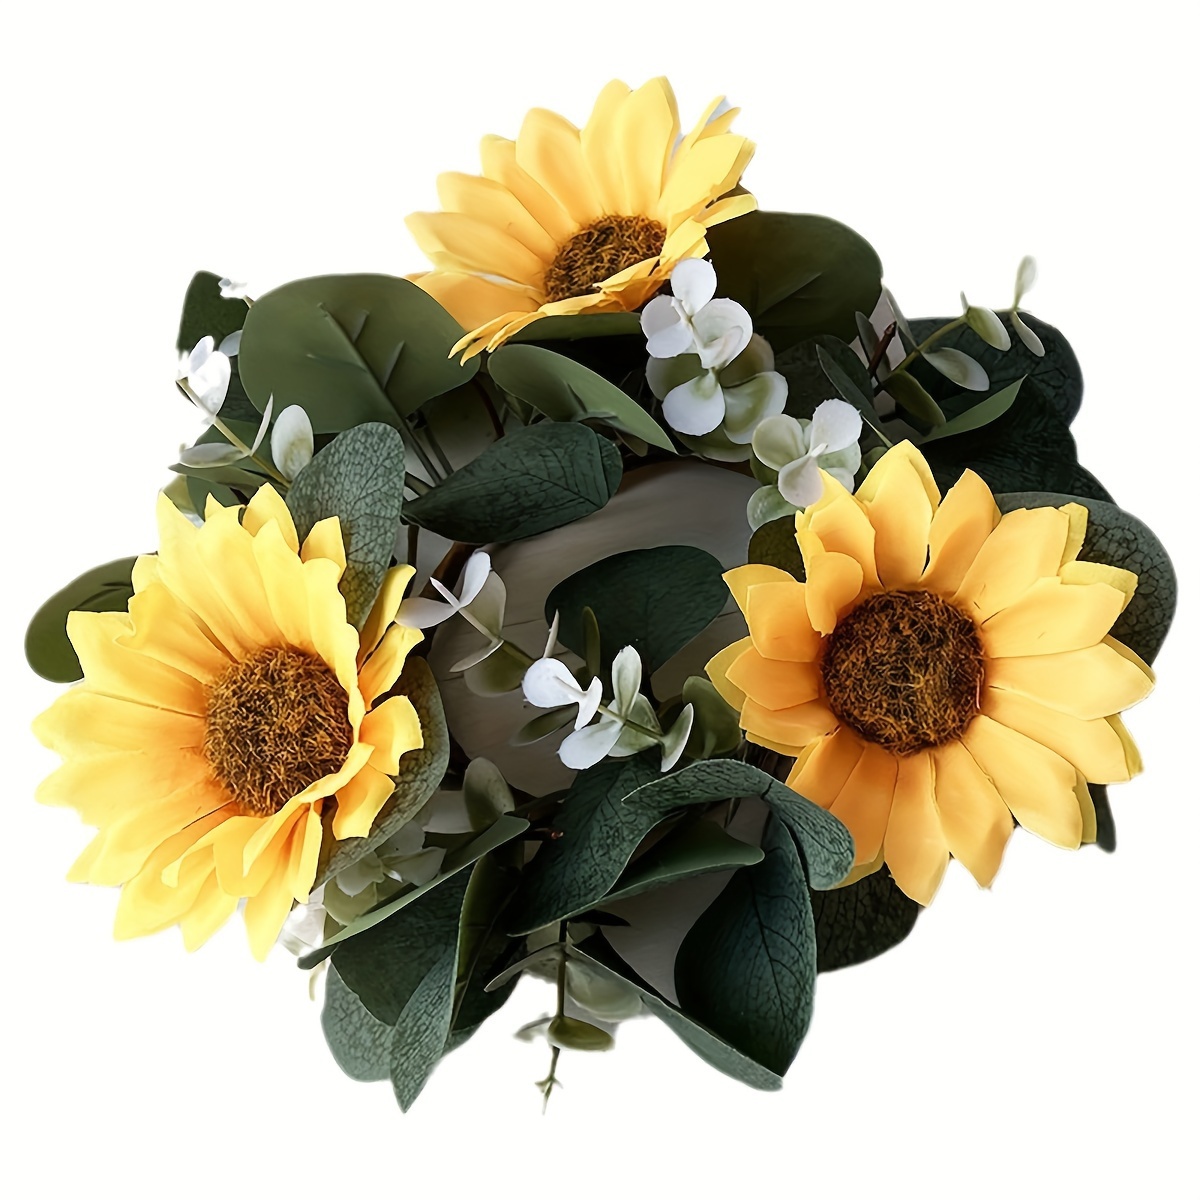 

1pc, Artificial Sunflower Candle Ring Wreath, Pillar Candle Lantern Wreath, Wedding Centerpieces, Party Home Table Decorations, Valentine's Day Dinner Decorations To Add Elegance To The Table